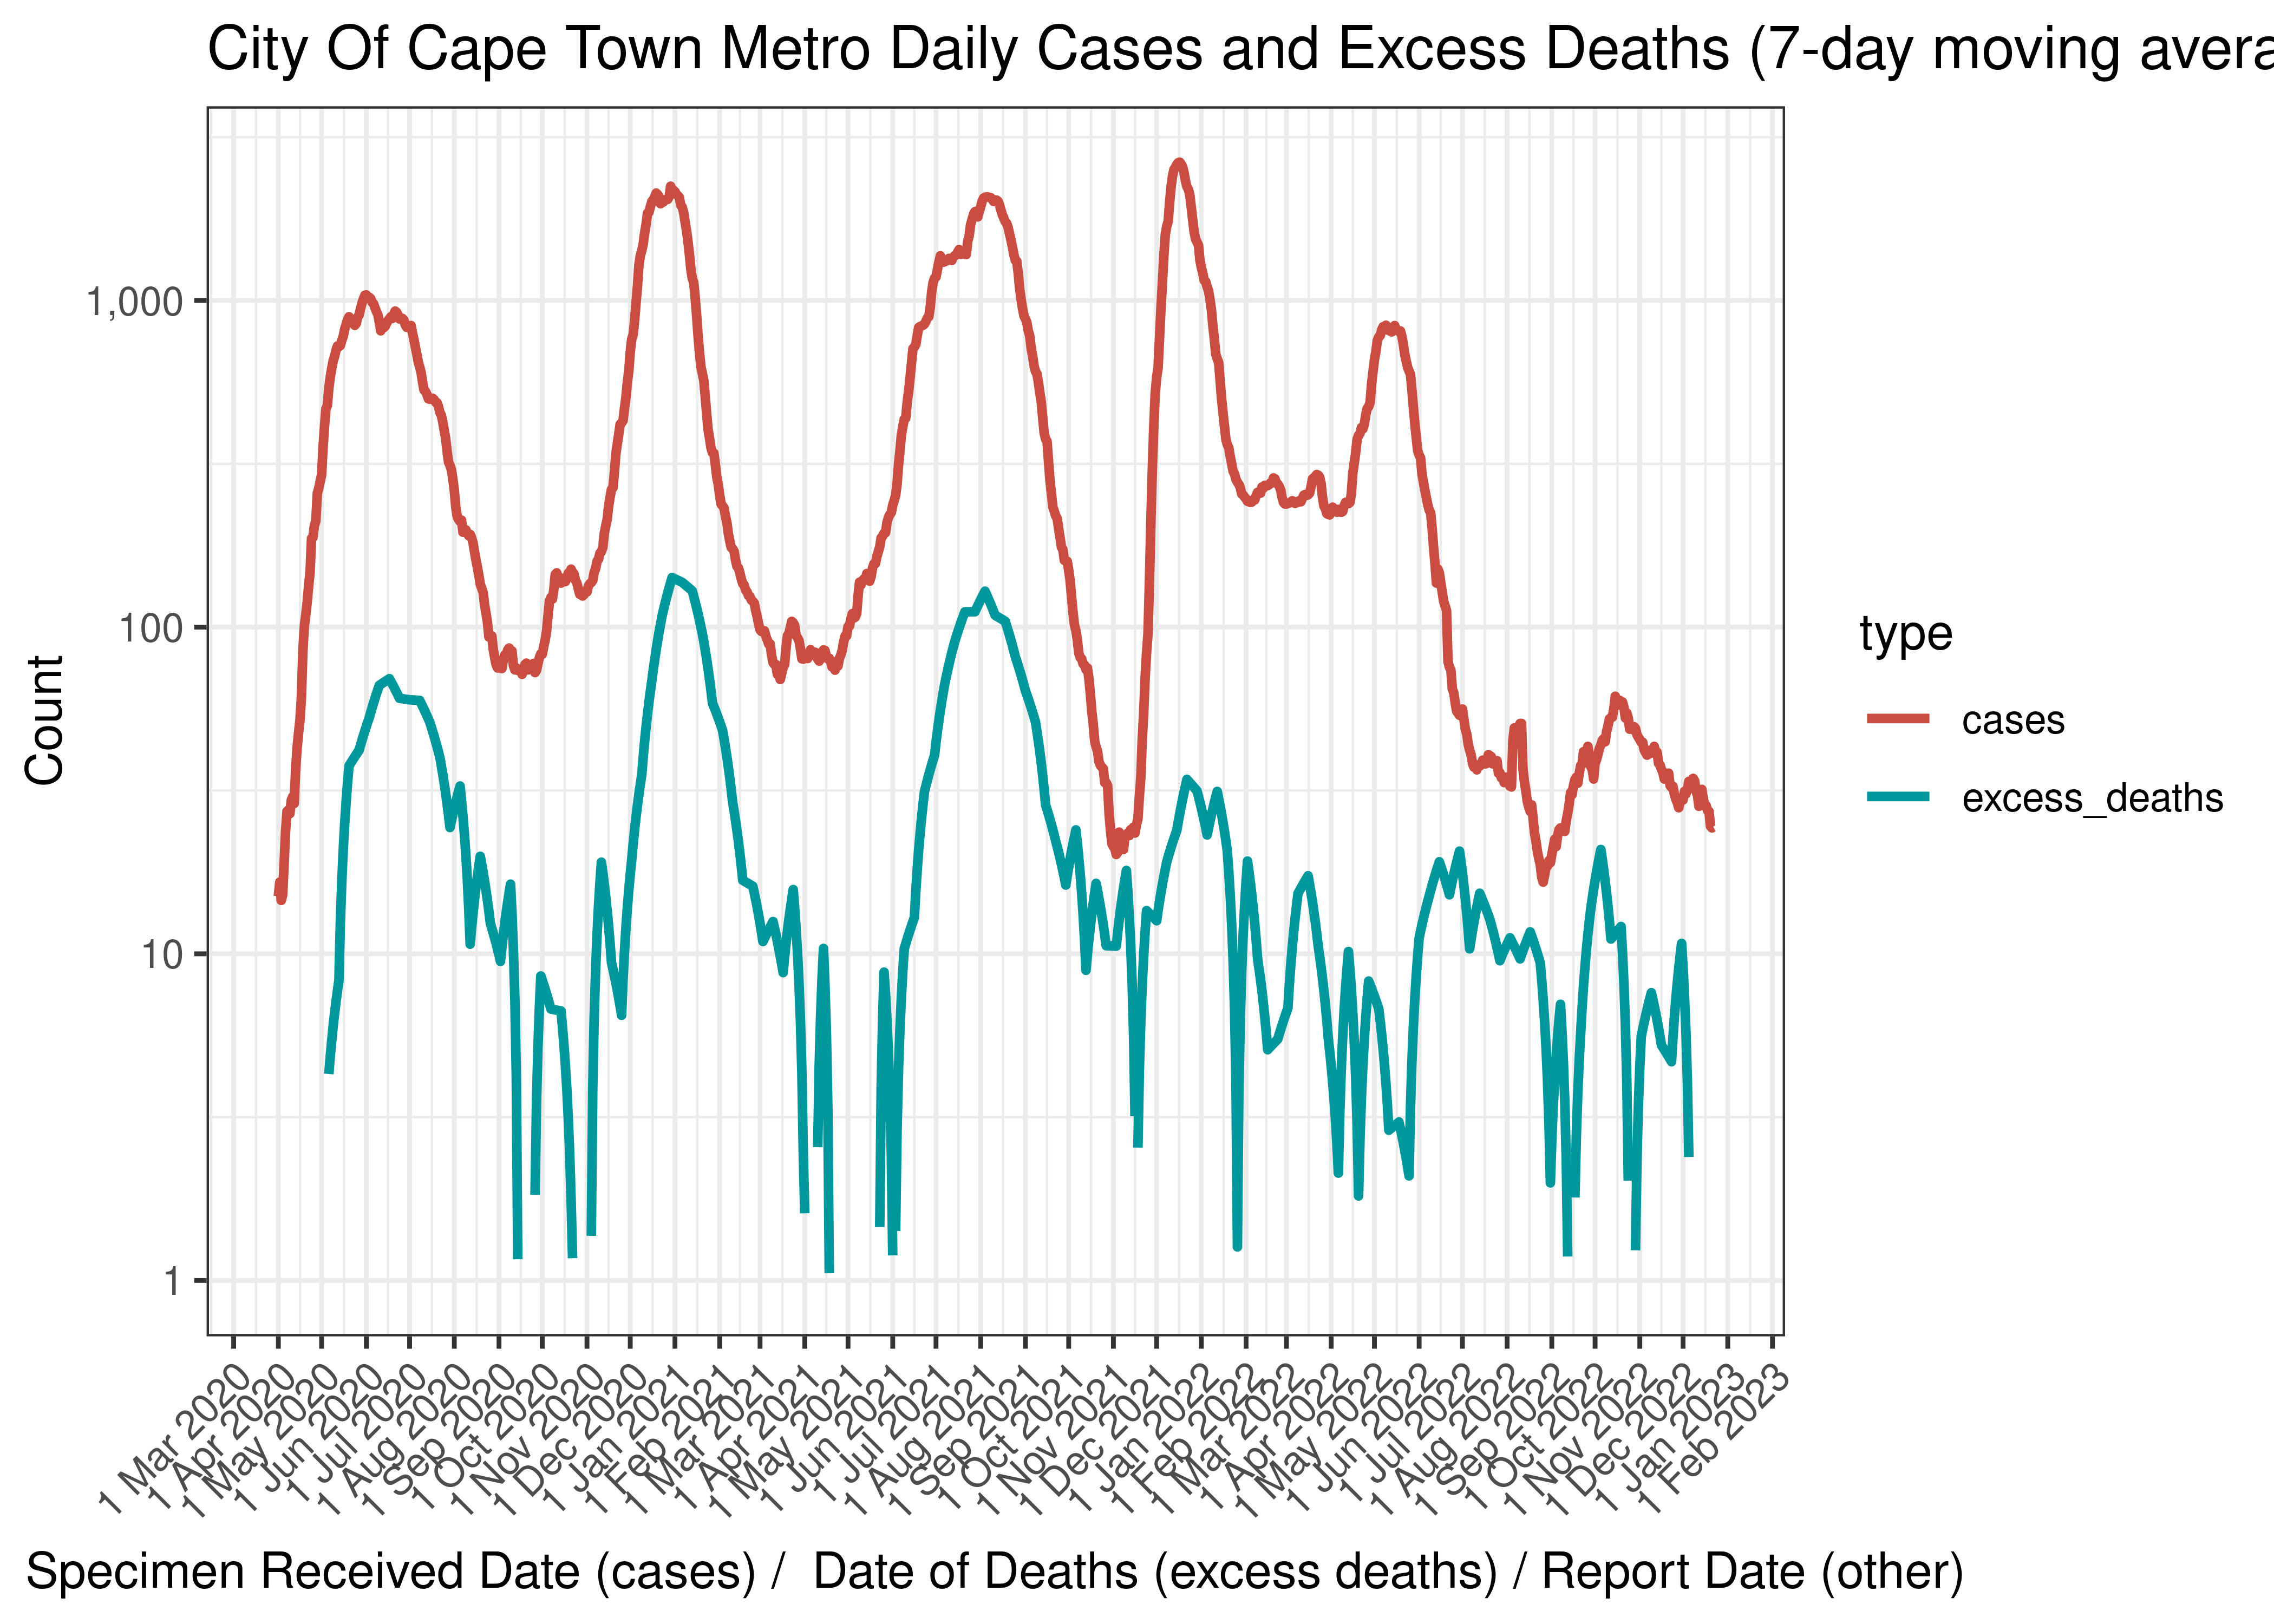 City Of Cape Town Metro Daily Cases and Excess Deaths (7-day moving average)